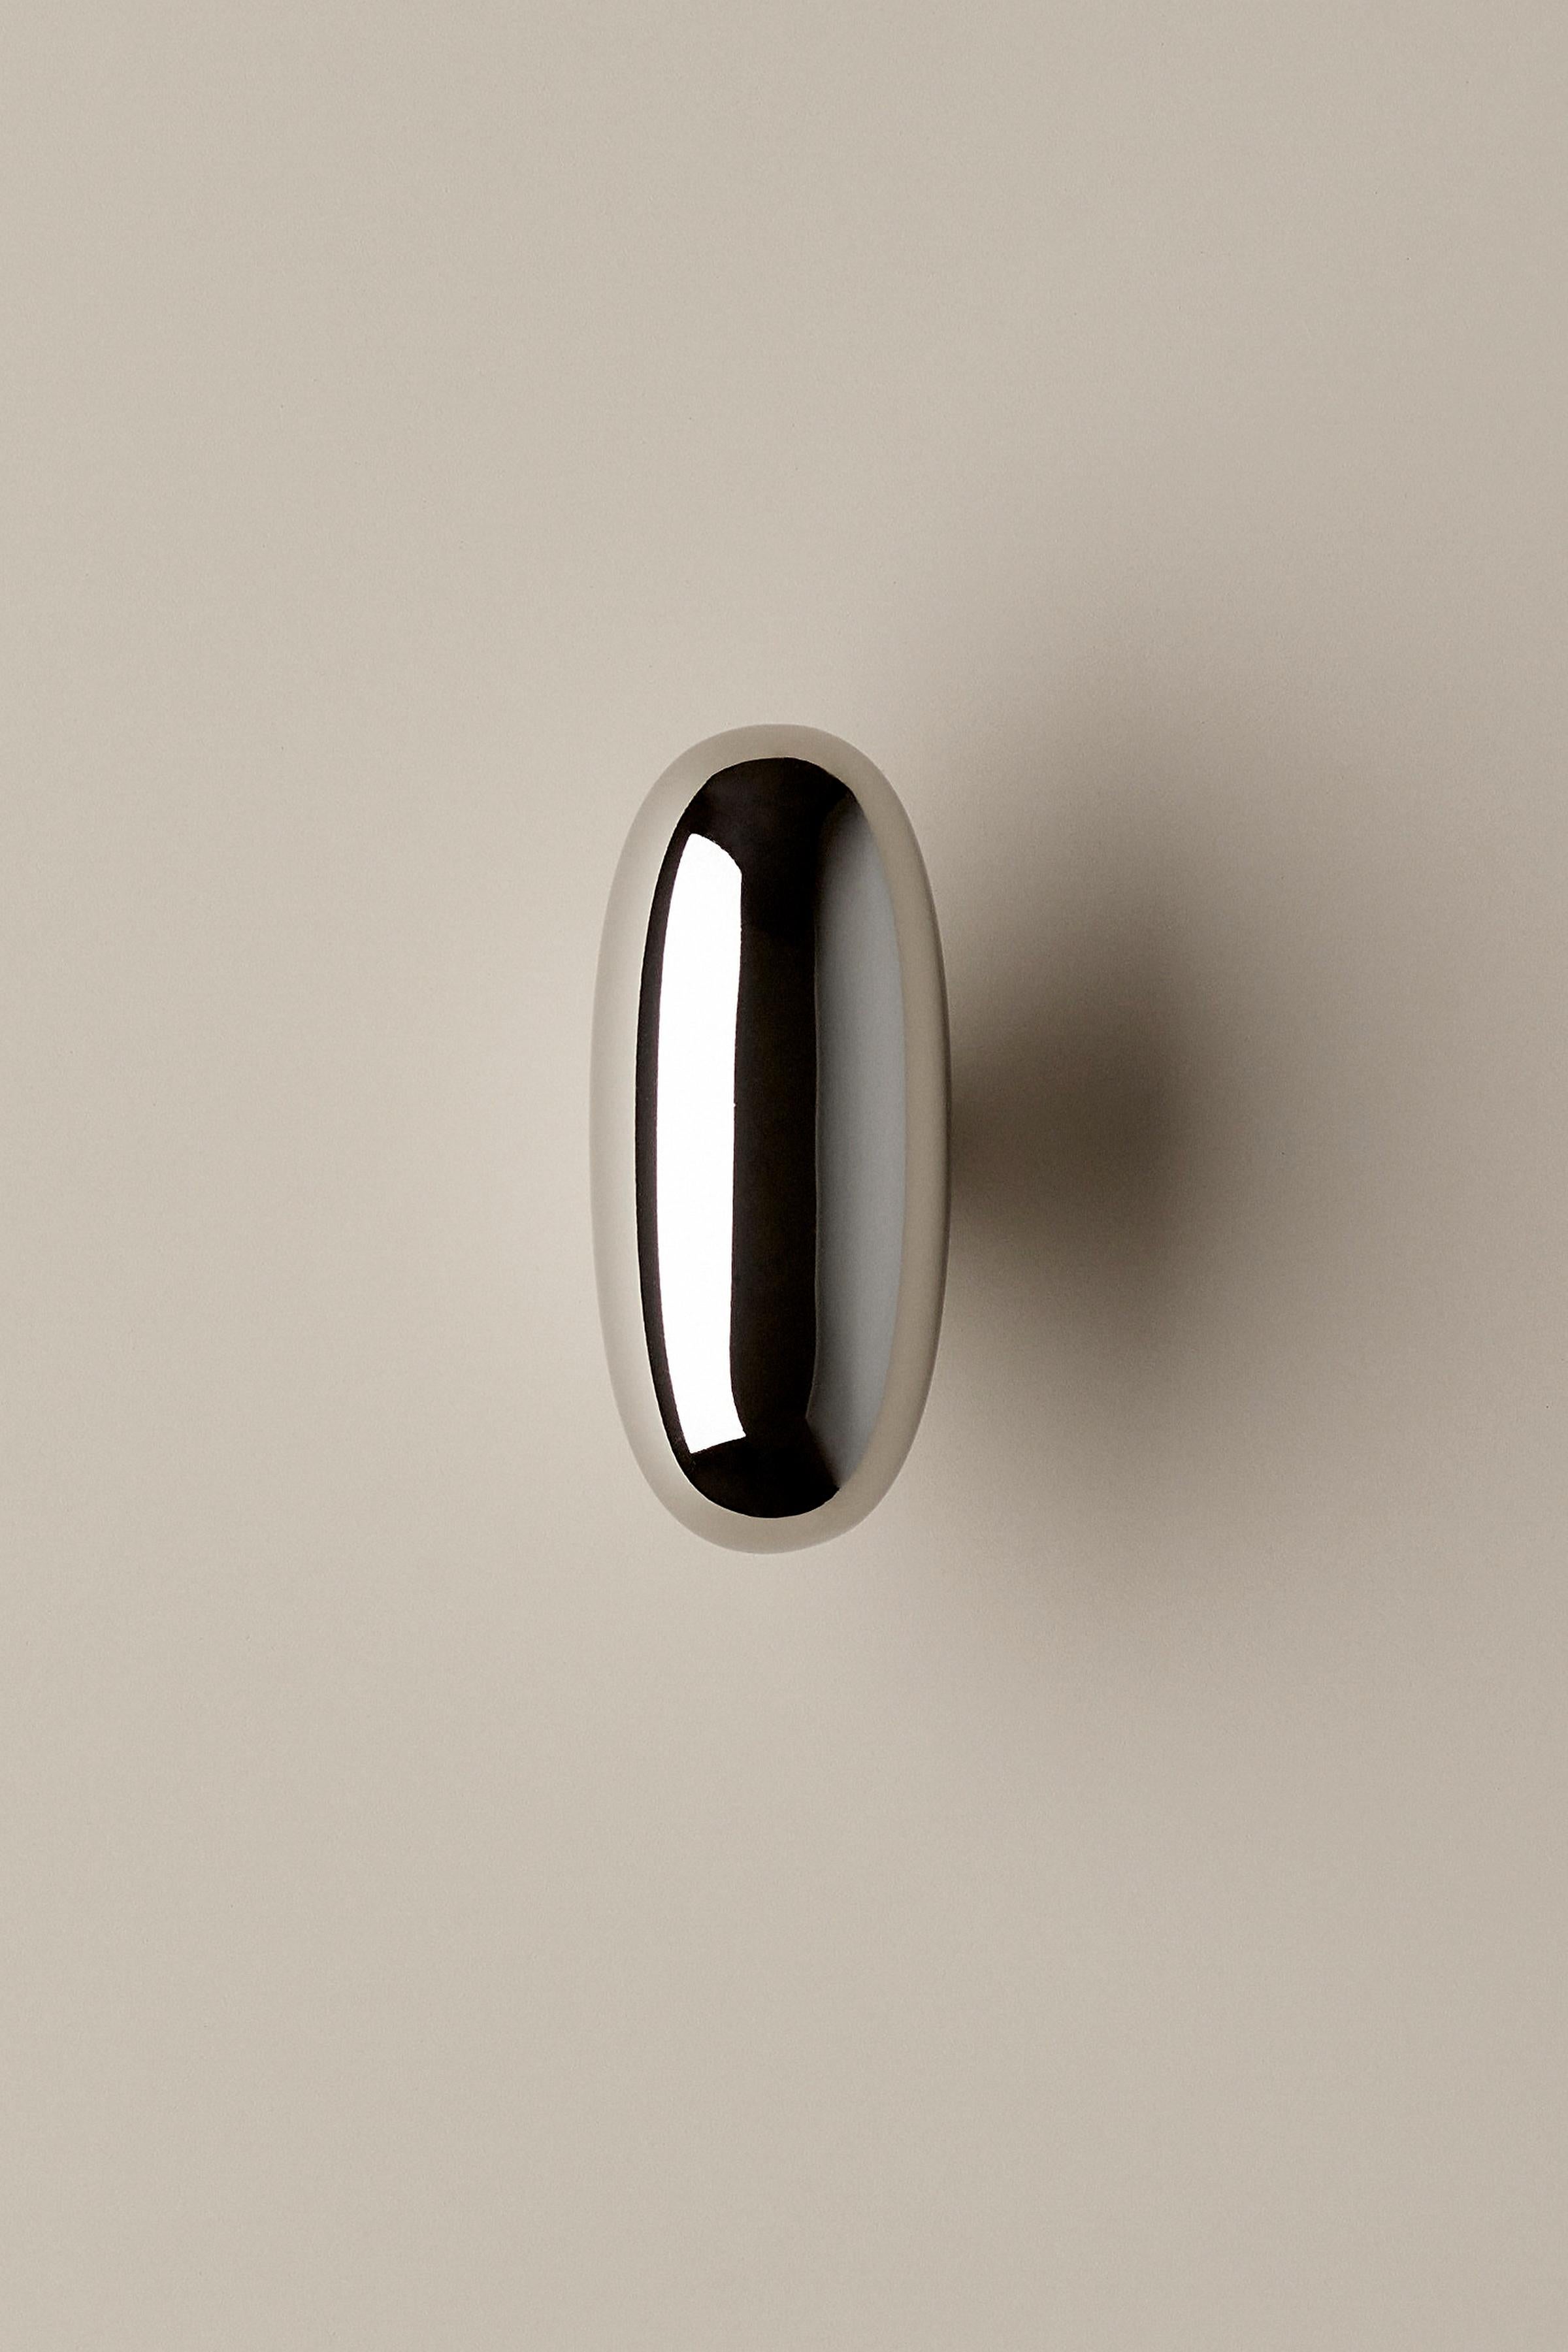 Contemporary Door Handle / Knob 'Blunt' by Spaces Within, Polished Nickel For Sale 1